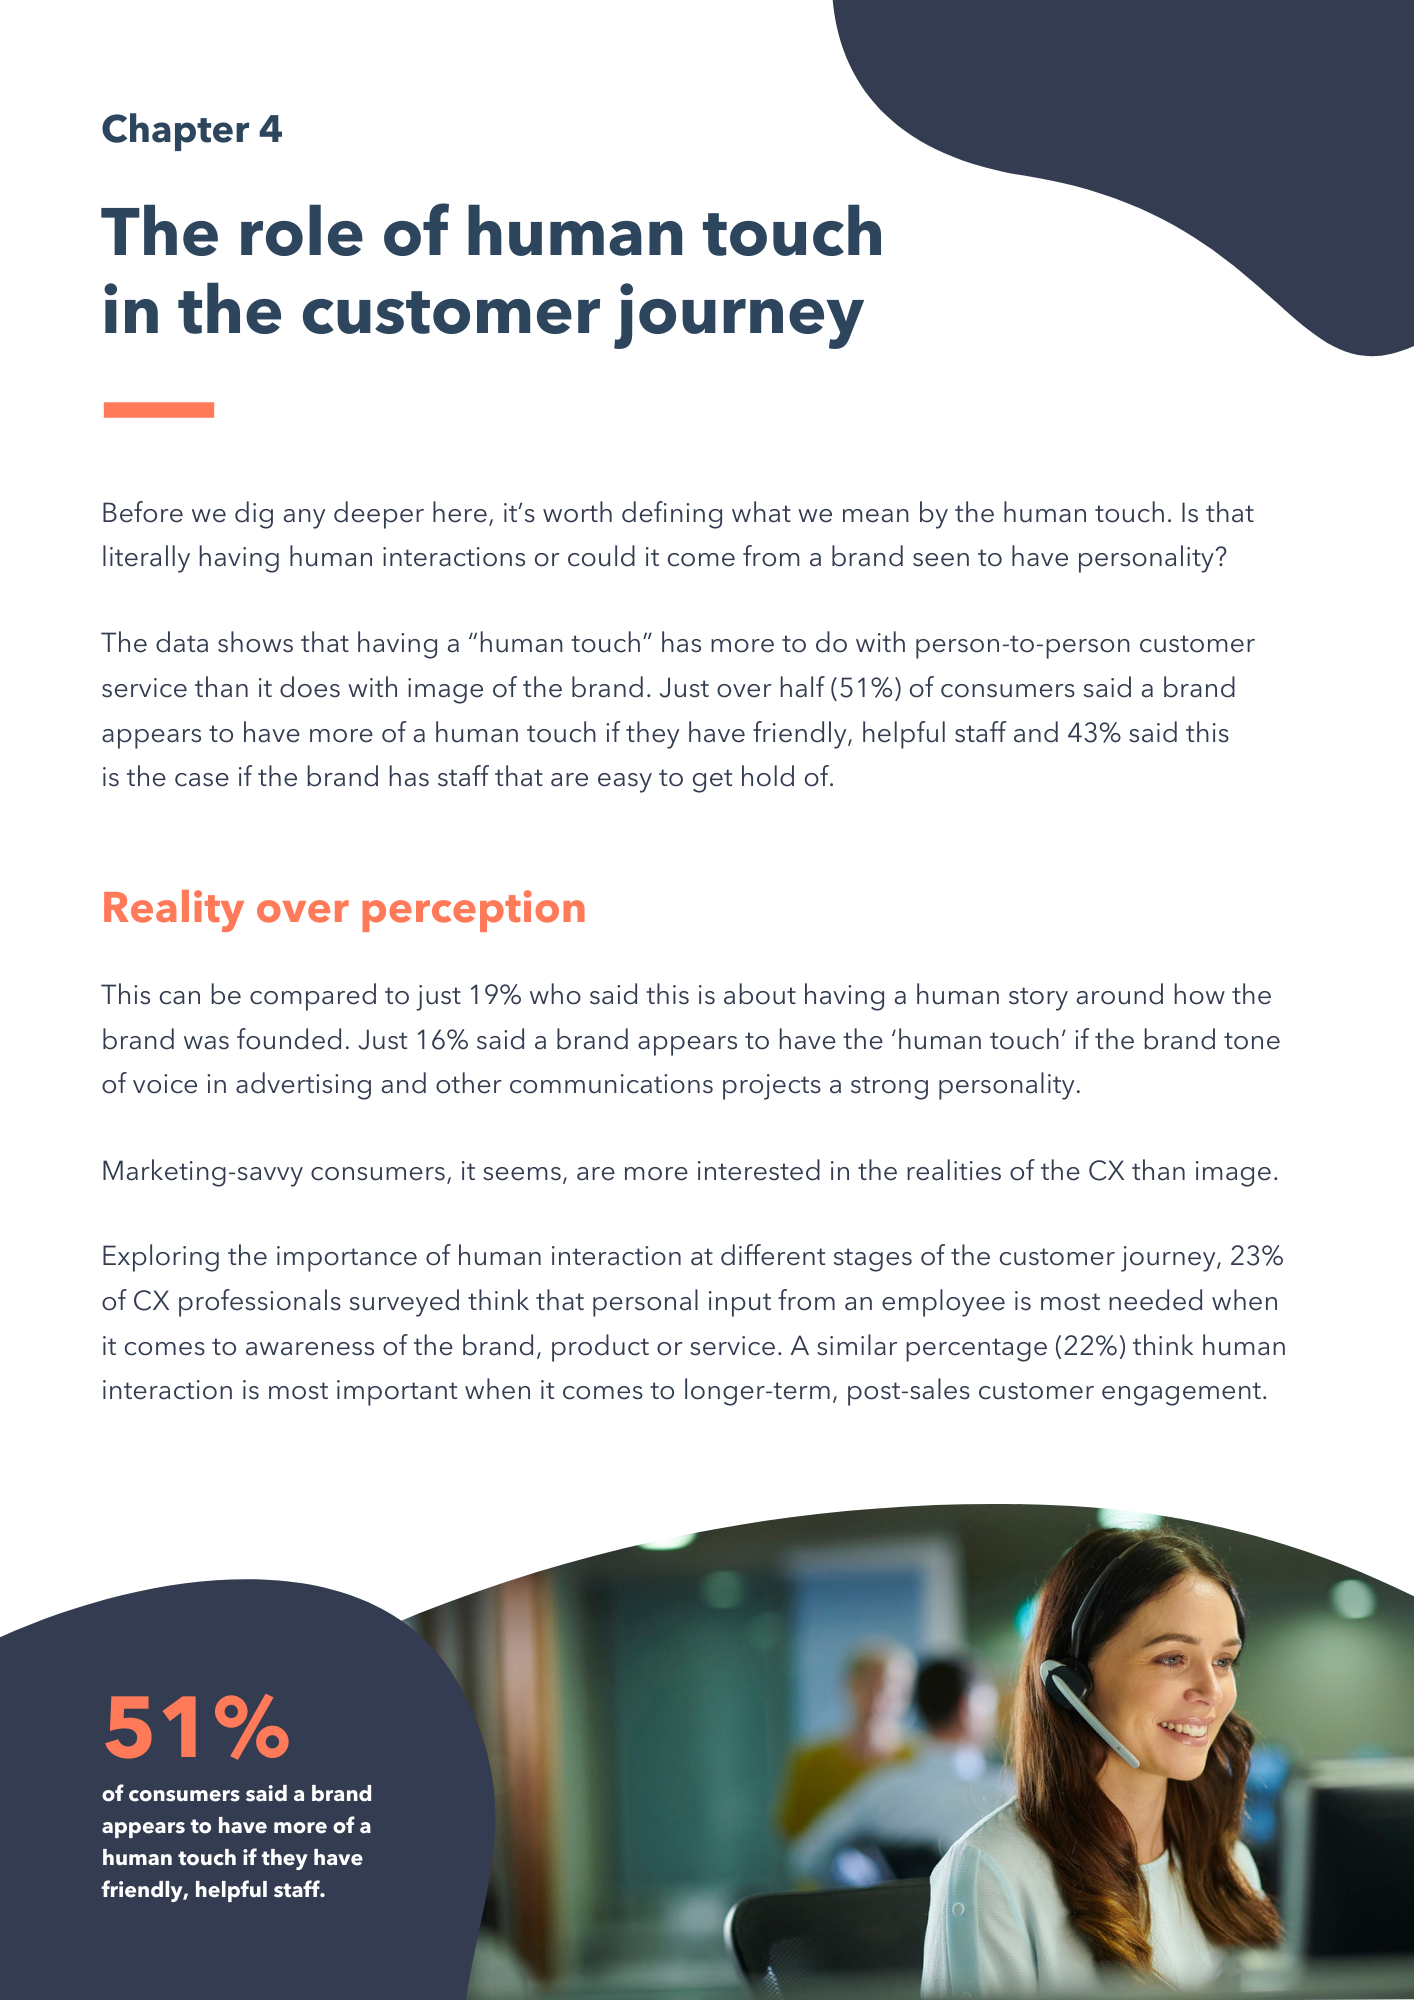 The role of human touch in the customer journey 